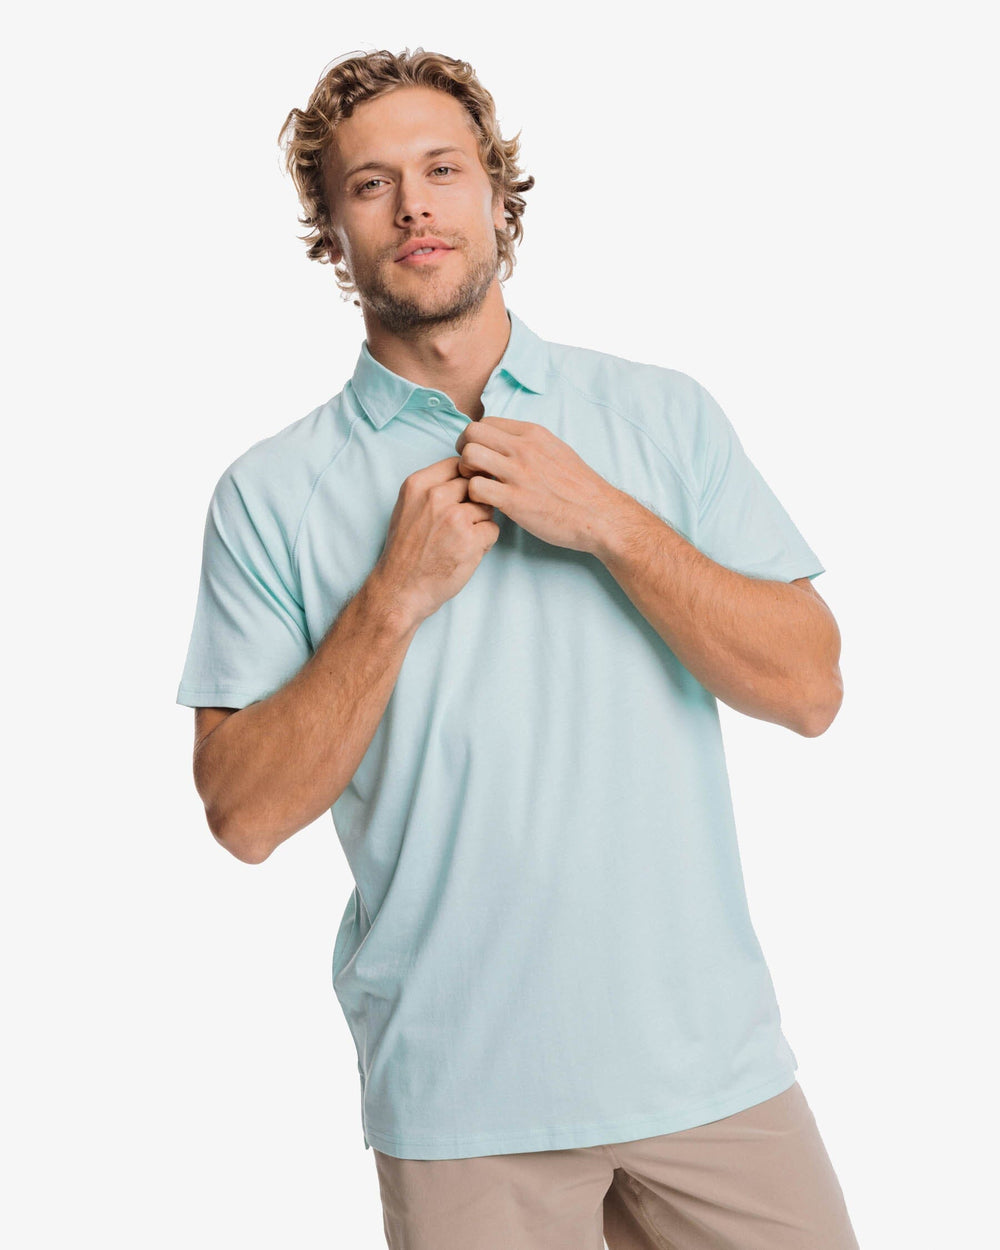 The front view of the Southern Tide Racquet Polo Shirt by Southern Tide - Baltic Teal